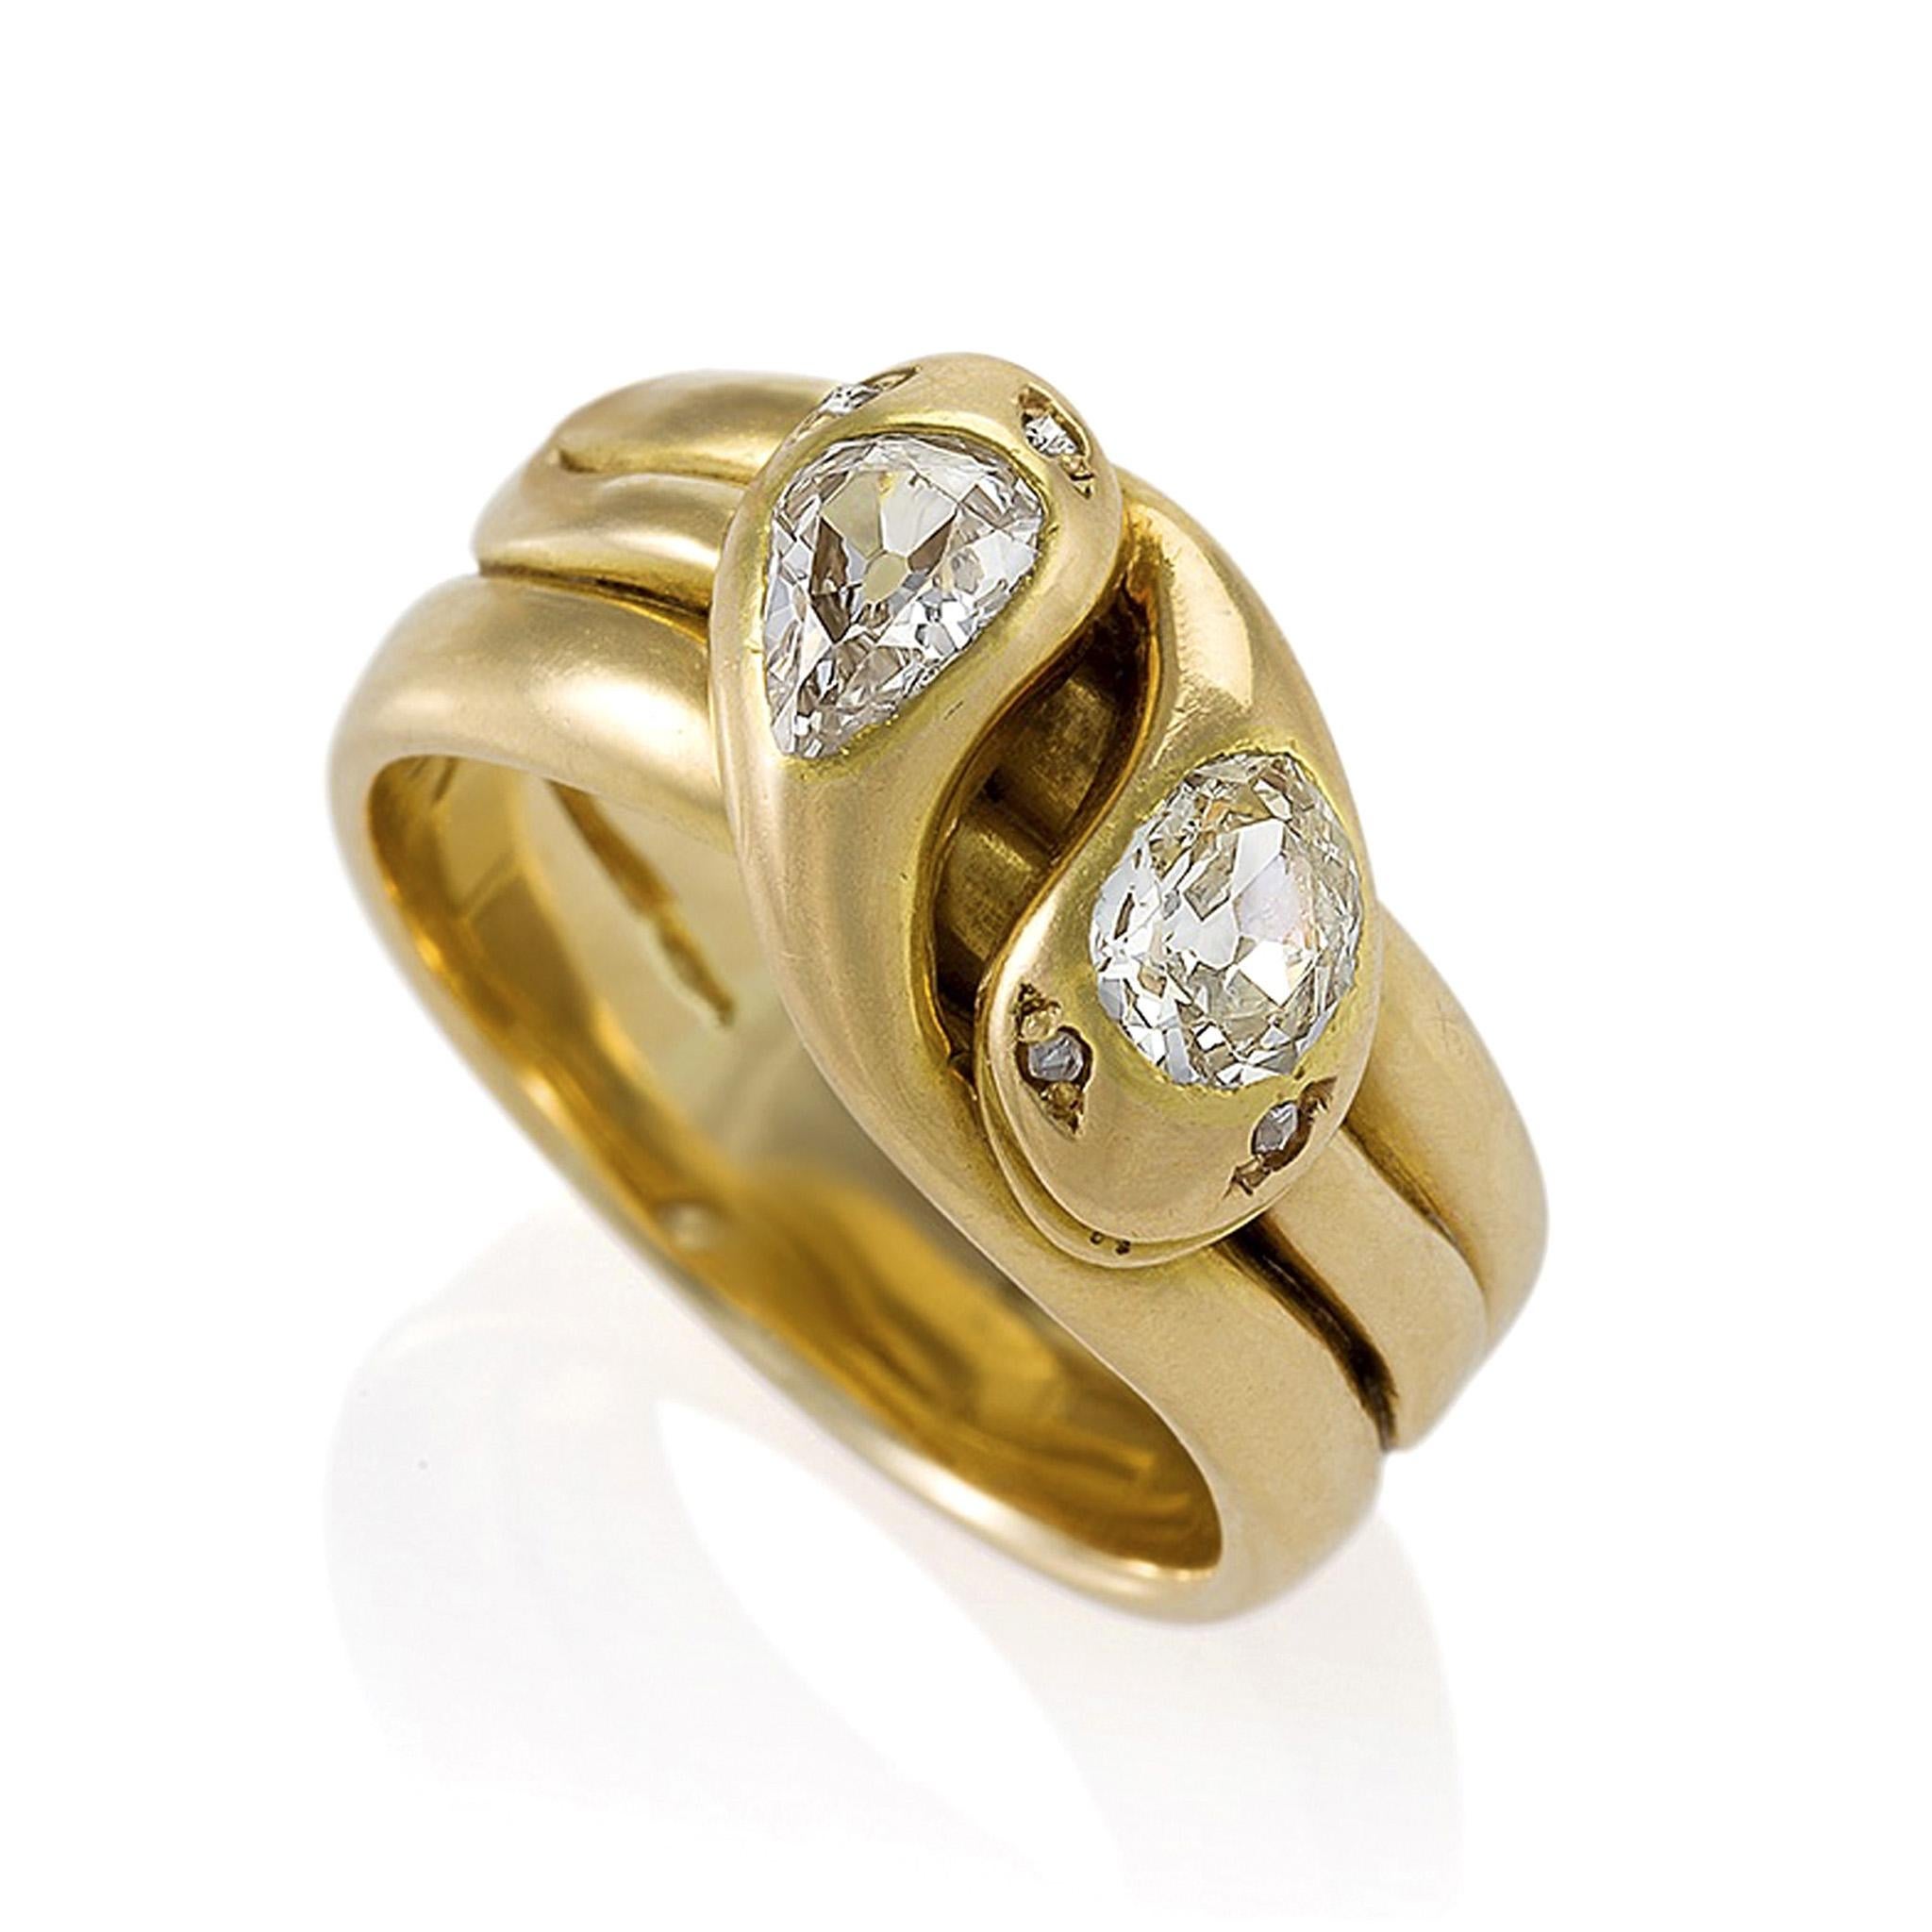 This ring is designed as gold double serpents with old pear-cut diamond heads and rose-cut diamond eyes, a Victorian design popularized by the royal wedding of Queen Victoria and Prince Albert. Give and receive these lovingly entwined serpents for